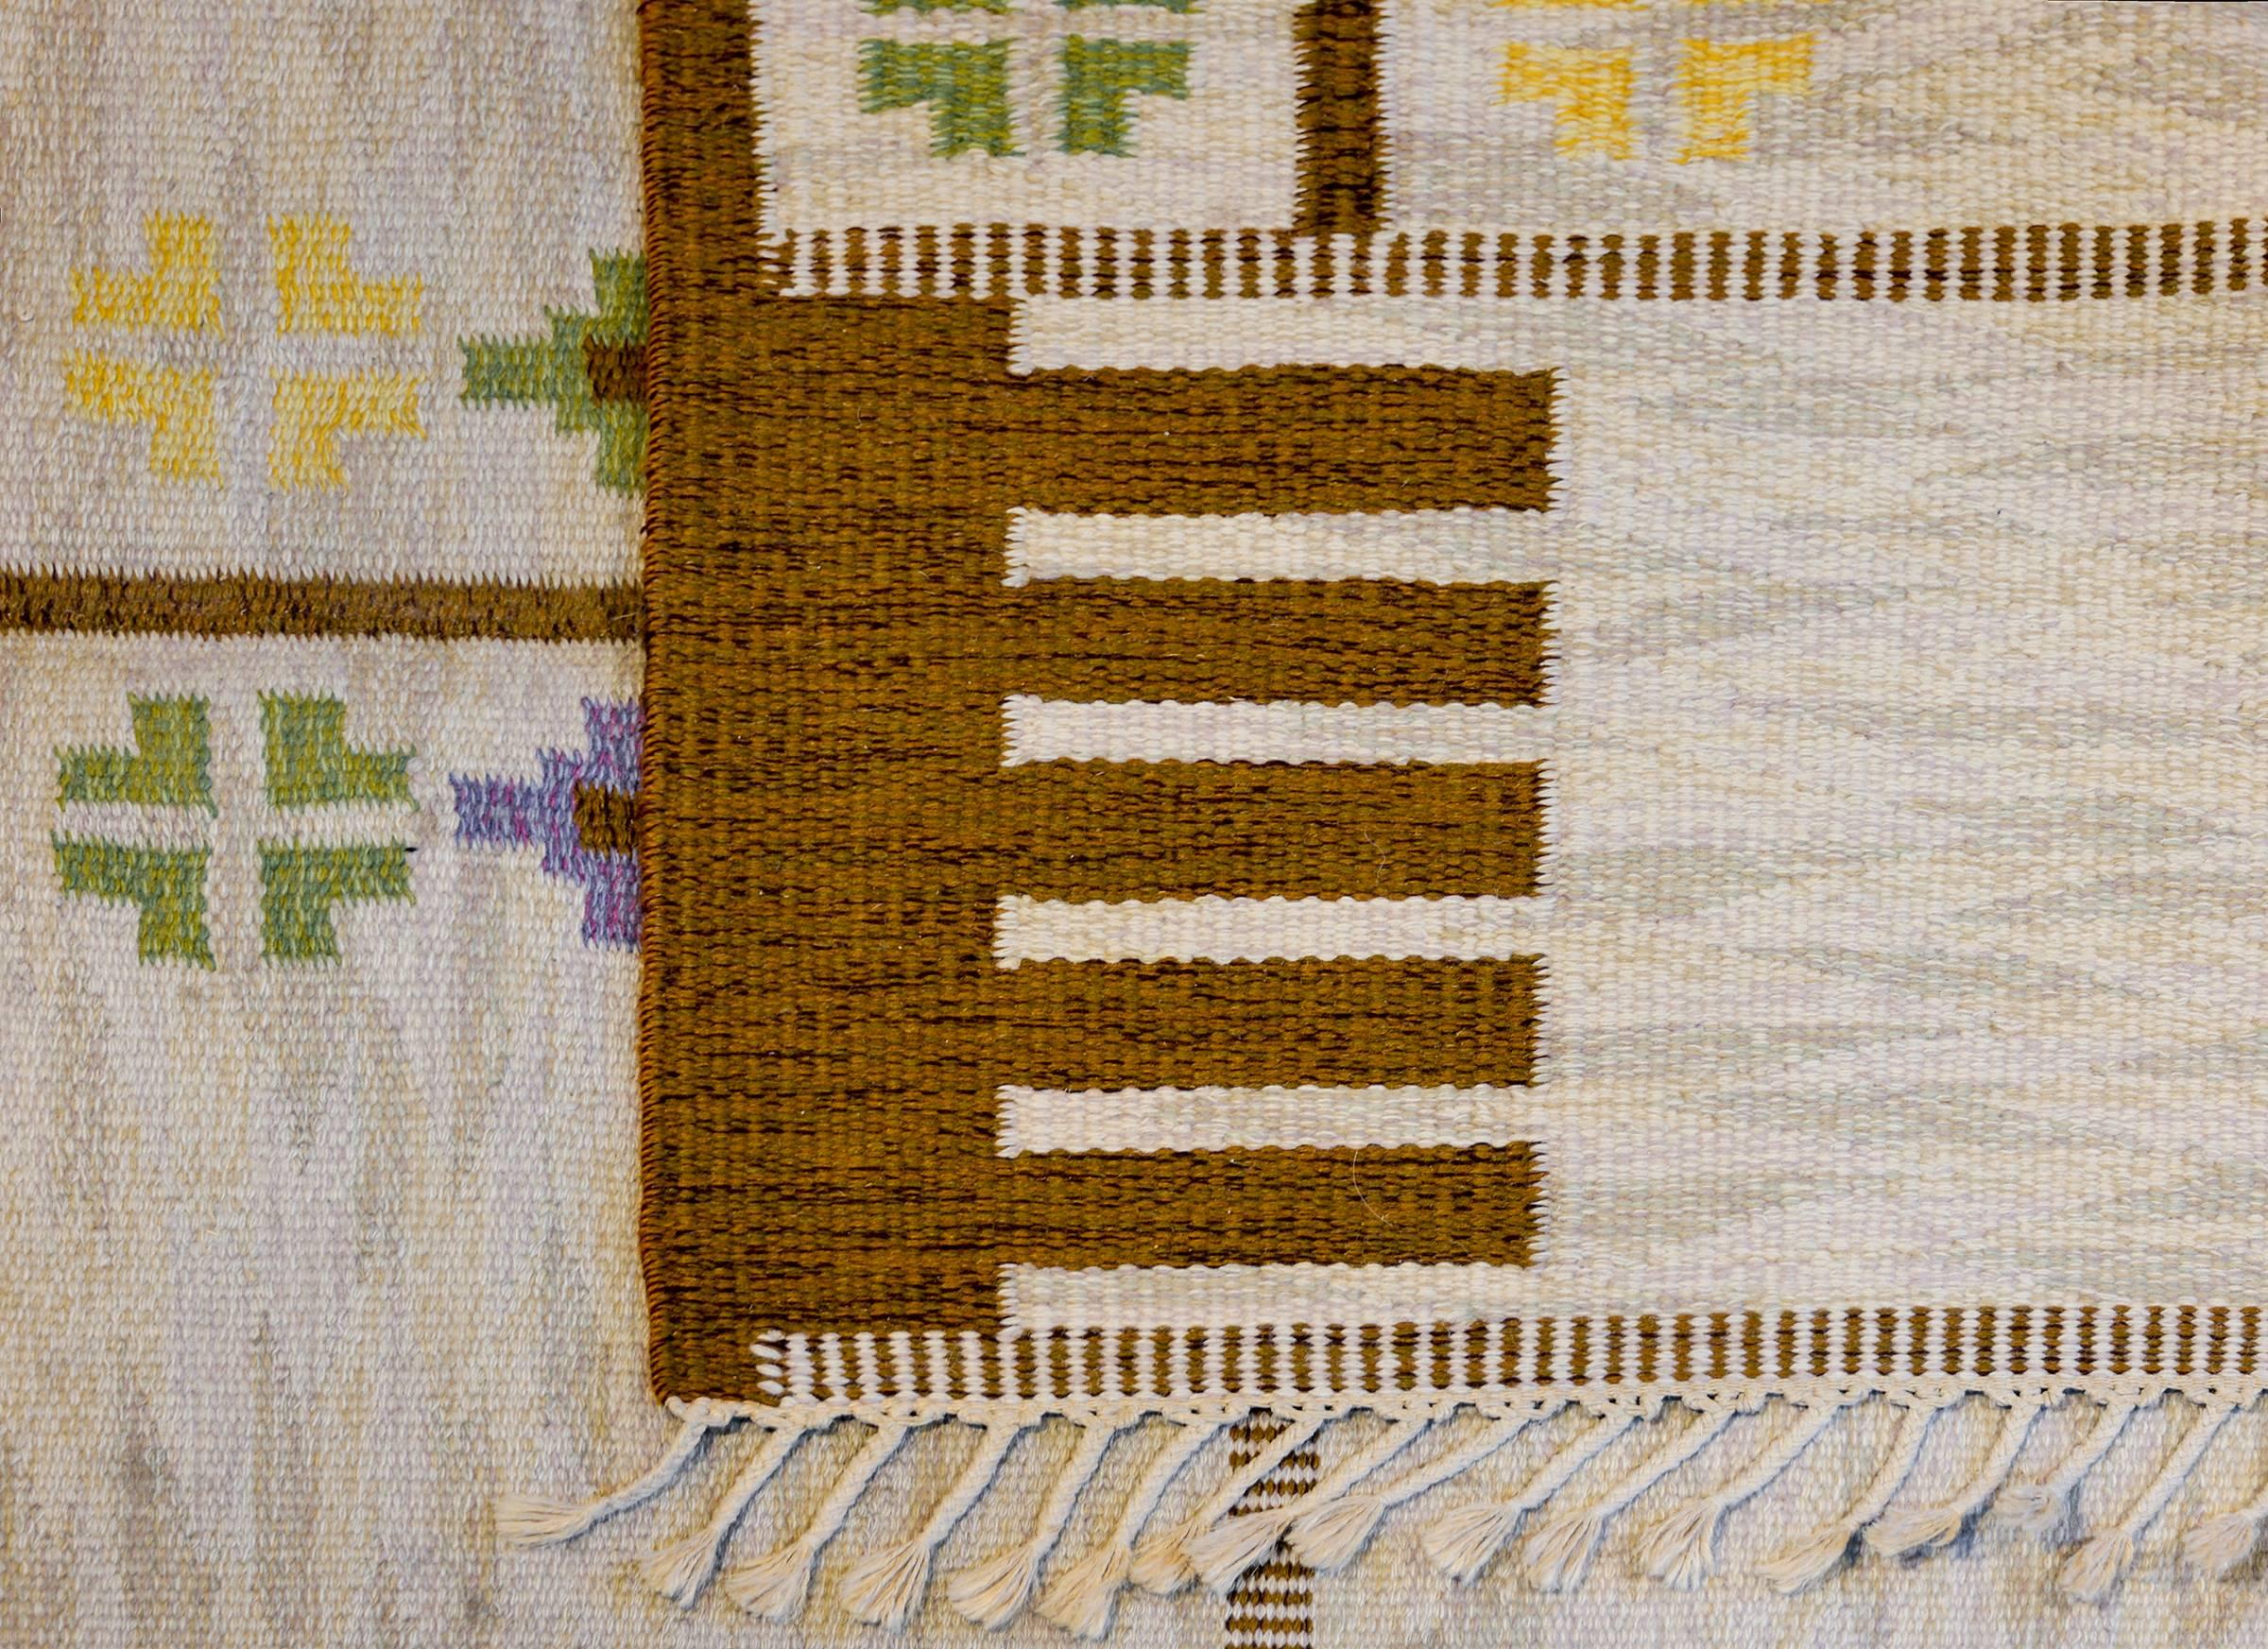 A wonderful vintage Swedish flat-weave Kilim with a sweet floral pattern composed with multiple alternating brown geometric shapes and pink, violet, yellow, and indigo stylized flowers across the field. There is no border.